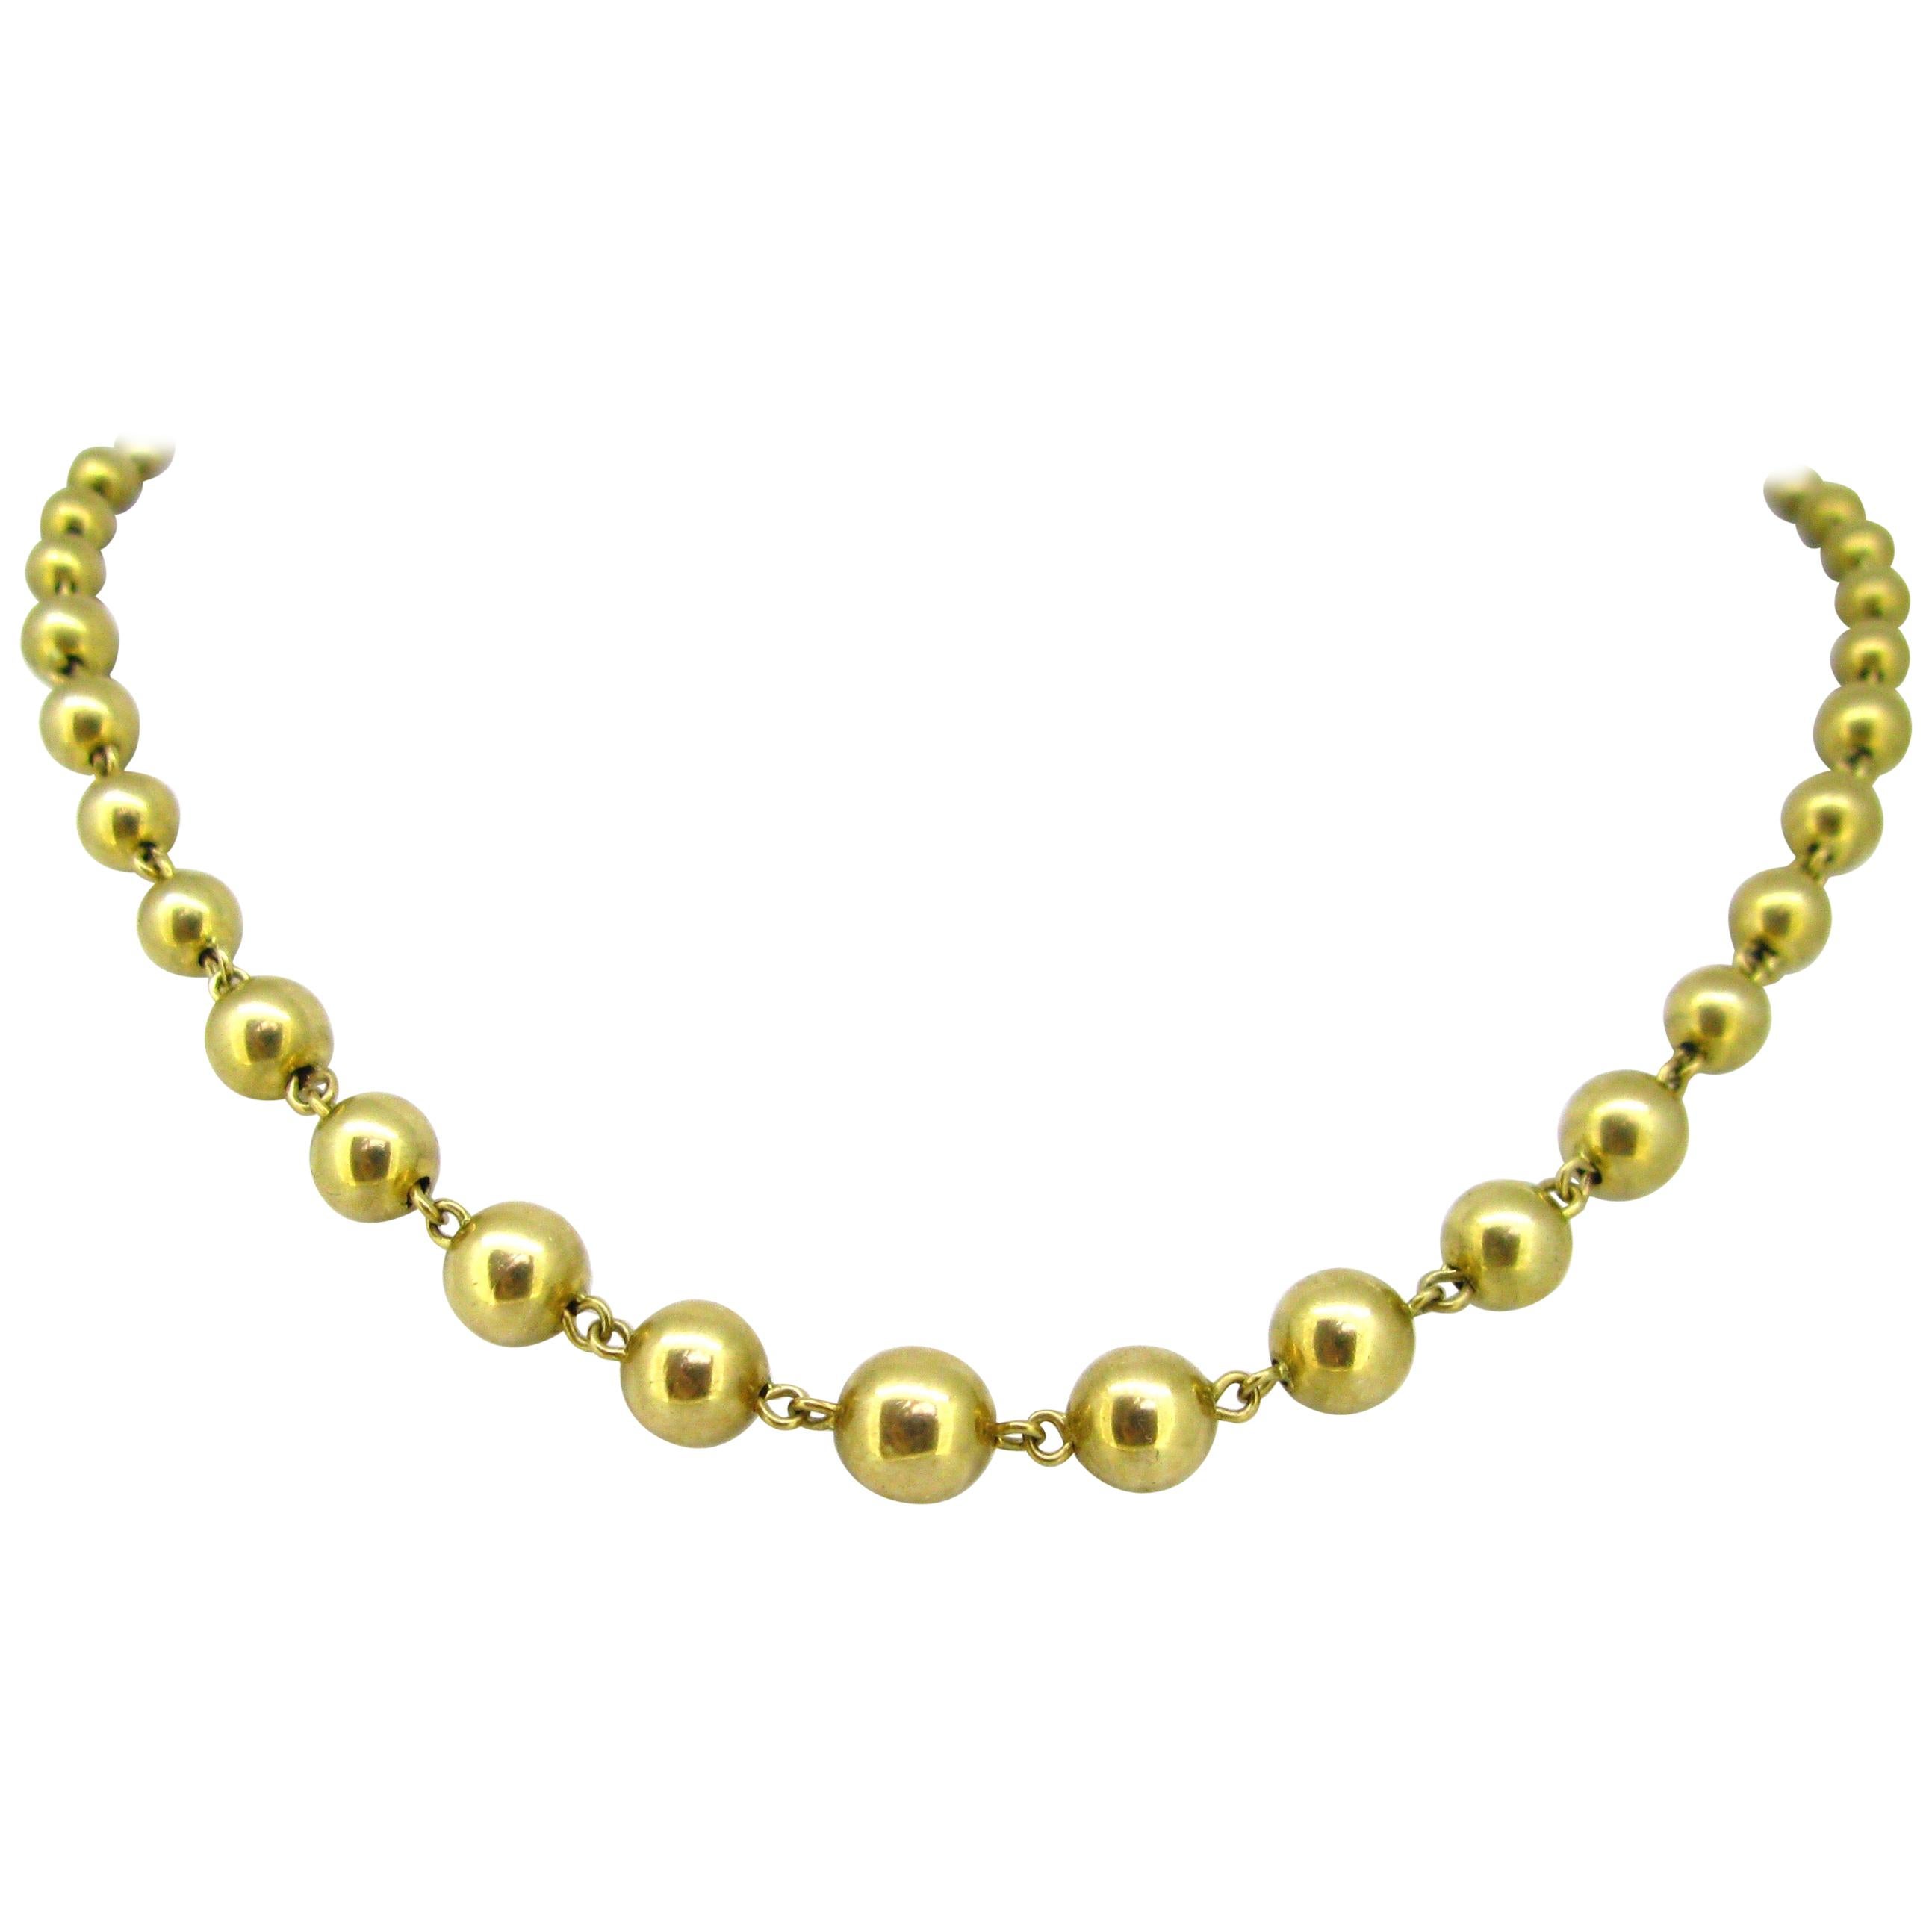 Graduated Beaded Yellow Gold Chain Link Necklace